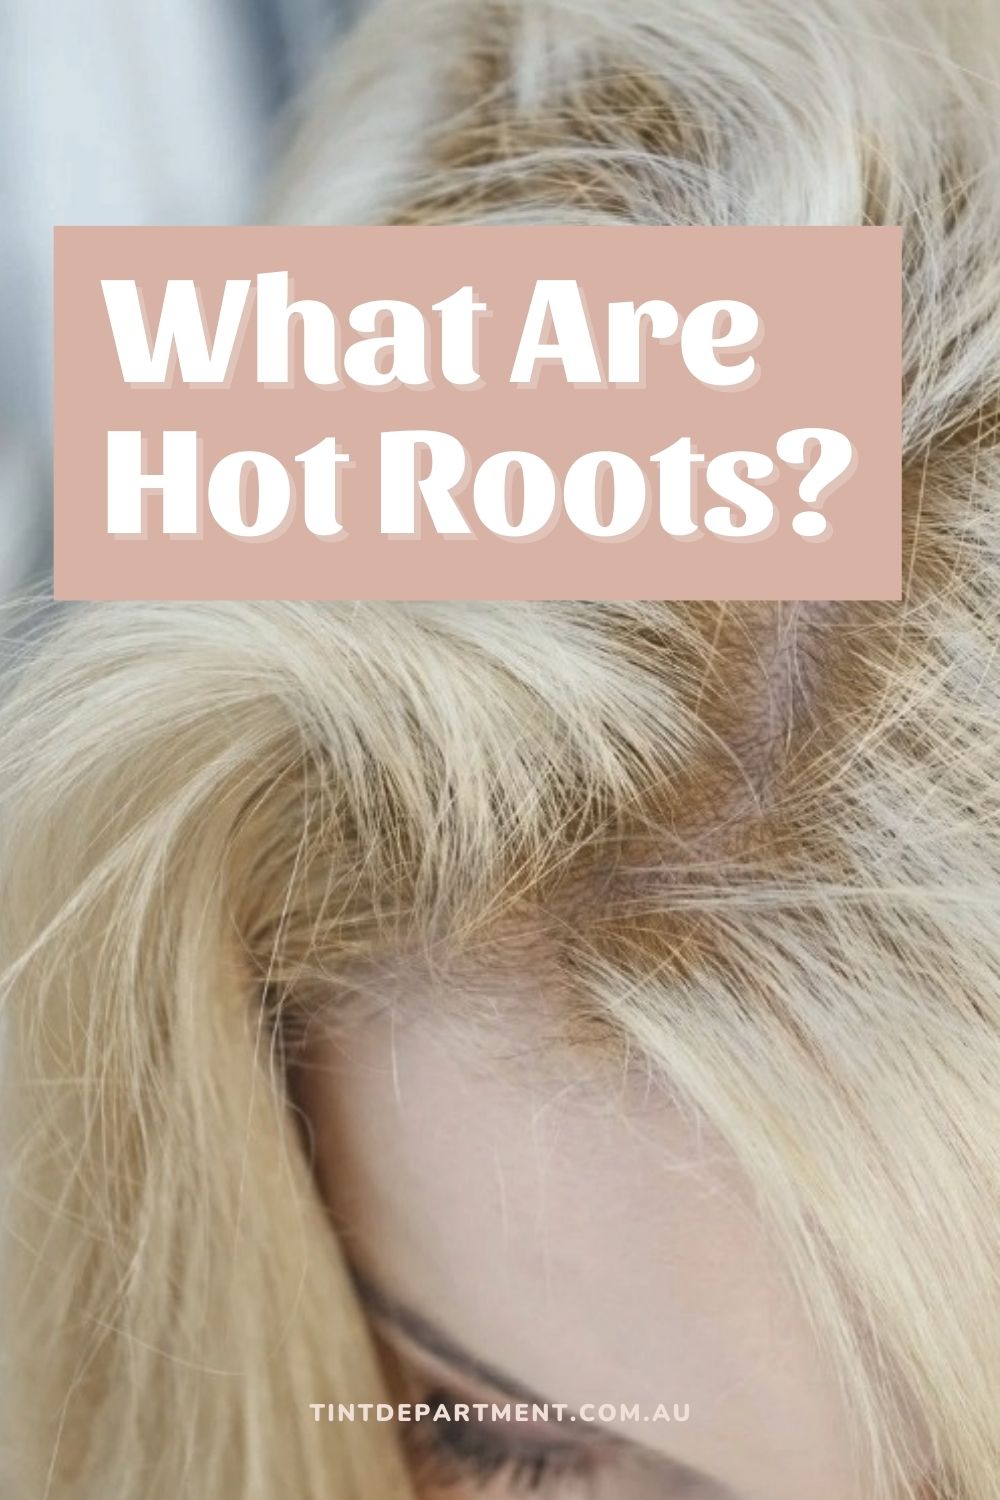 What Are Hot Roots?